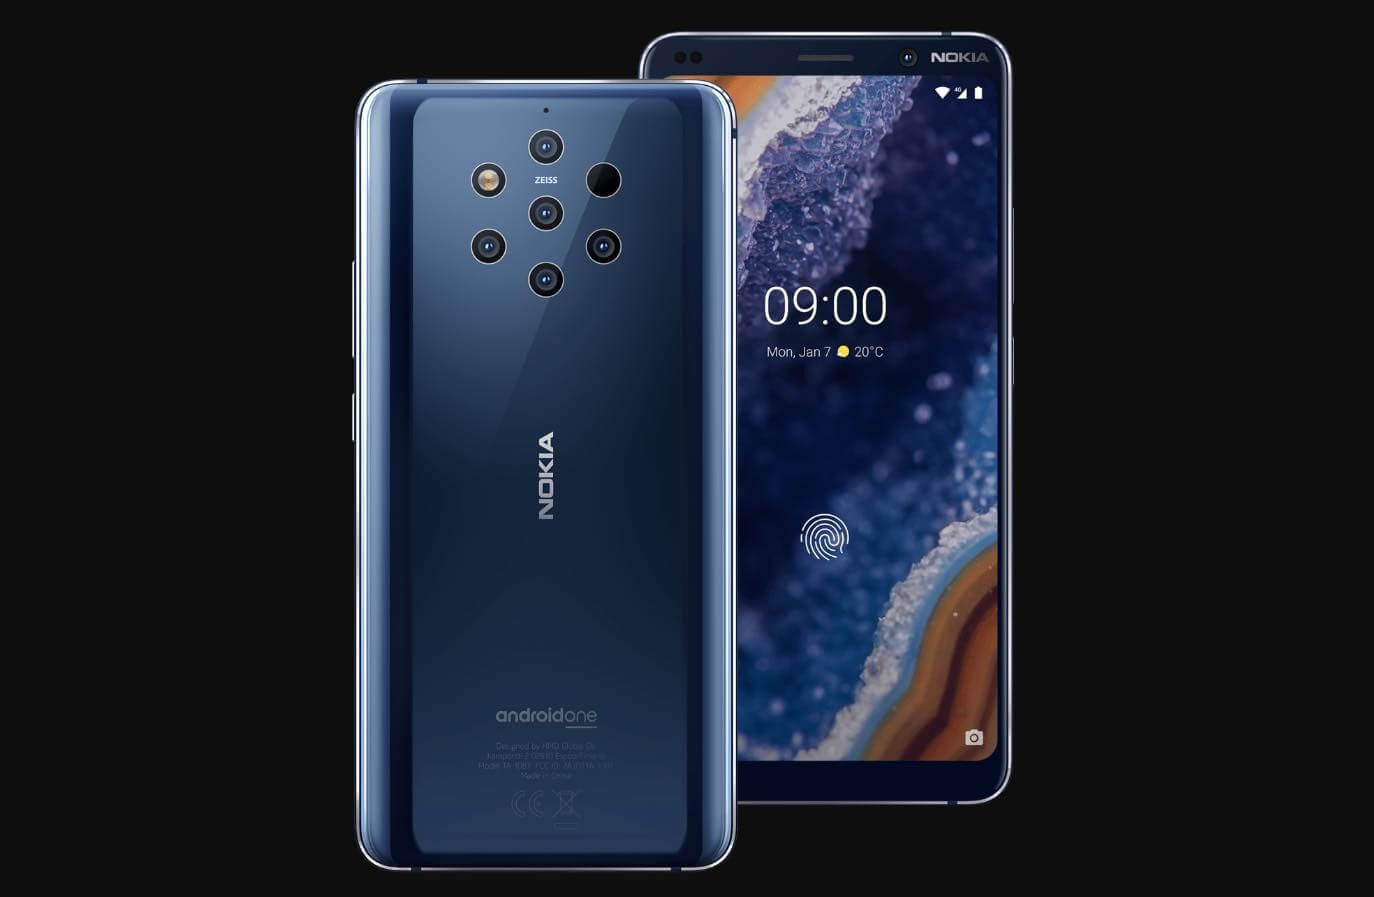 The Nokia 9 PureView's five rear cameras take aim at photography fans